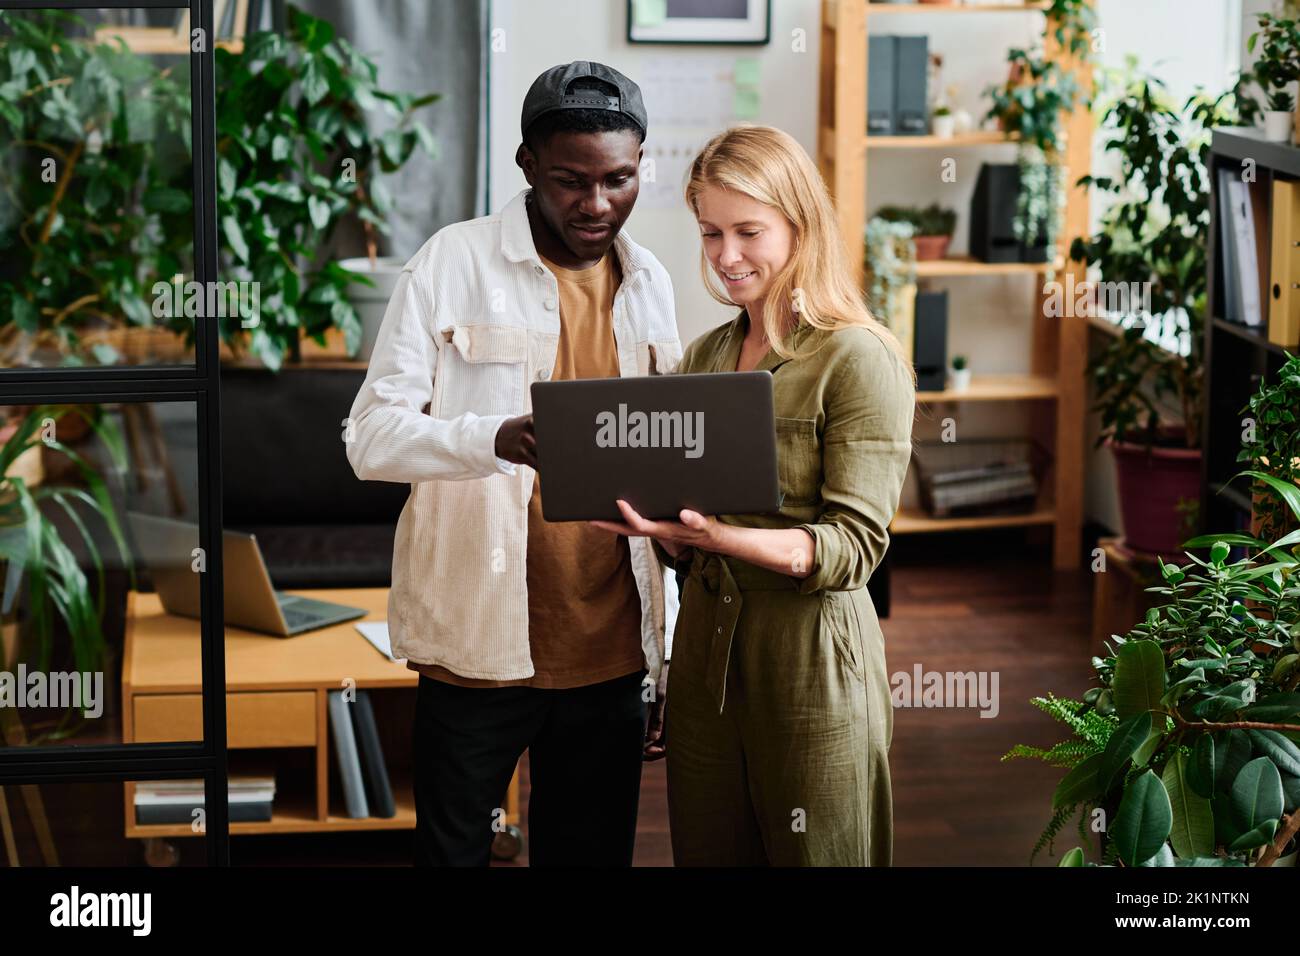 Two young intercultural employees in casualwear looking at screen of laptop held by blond businesswoman during discussion Stock Photo